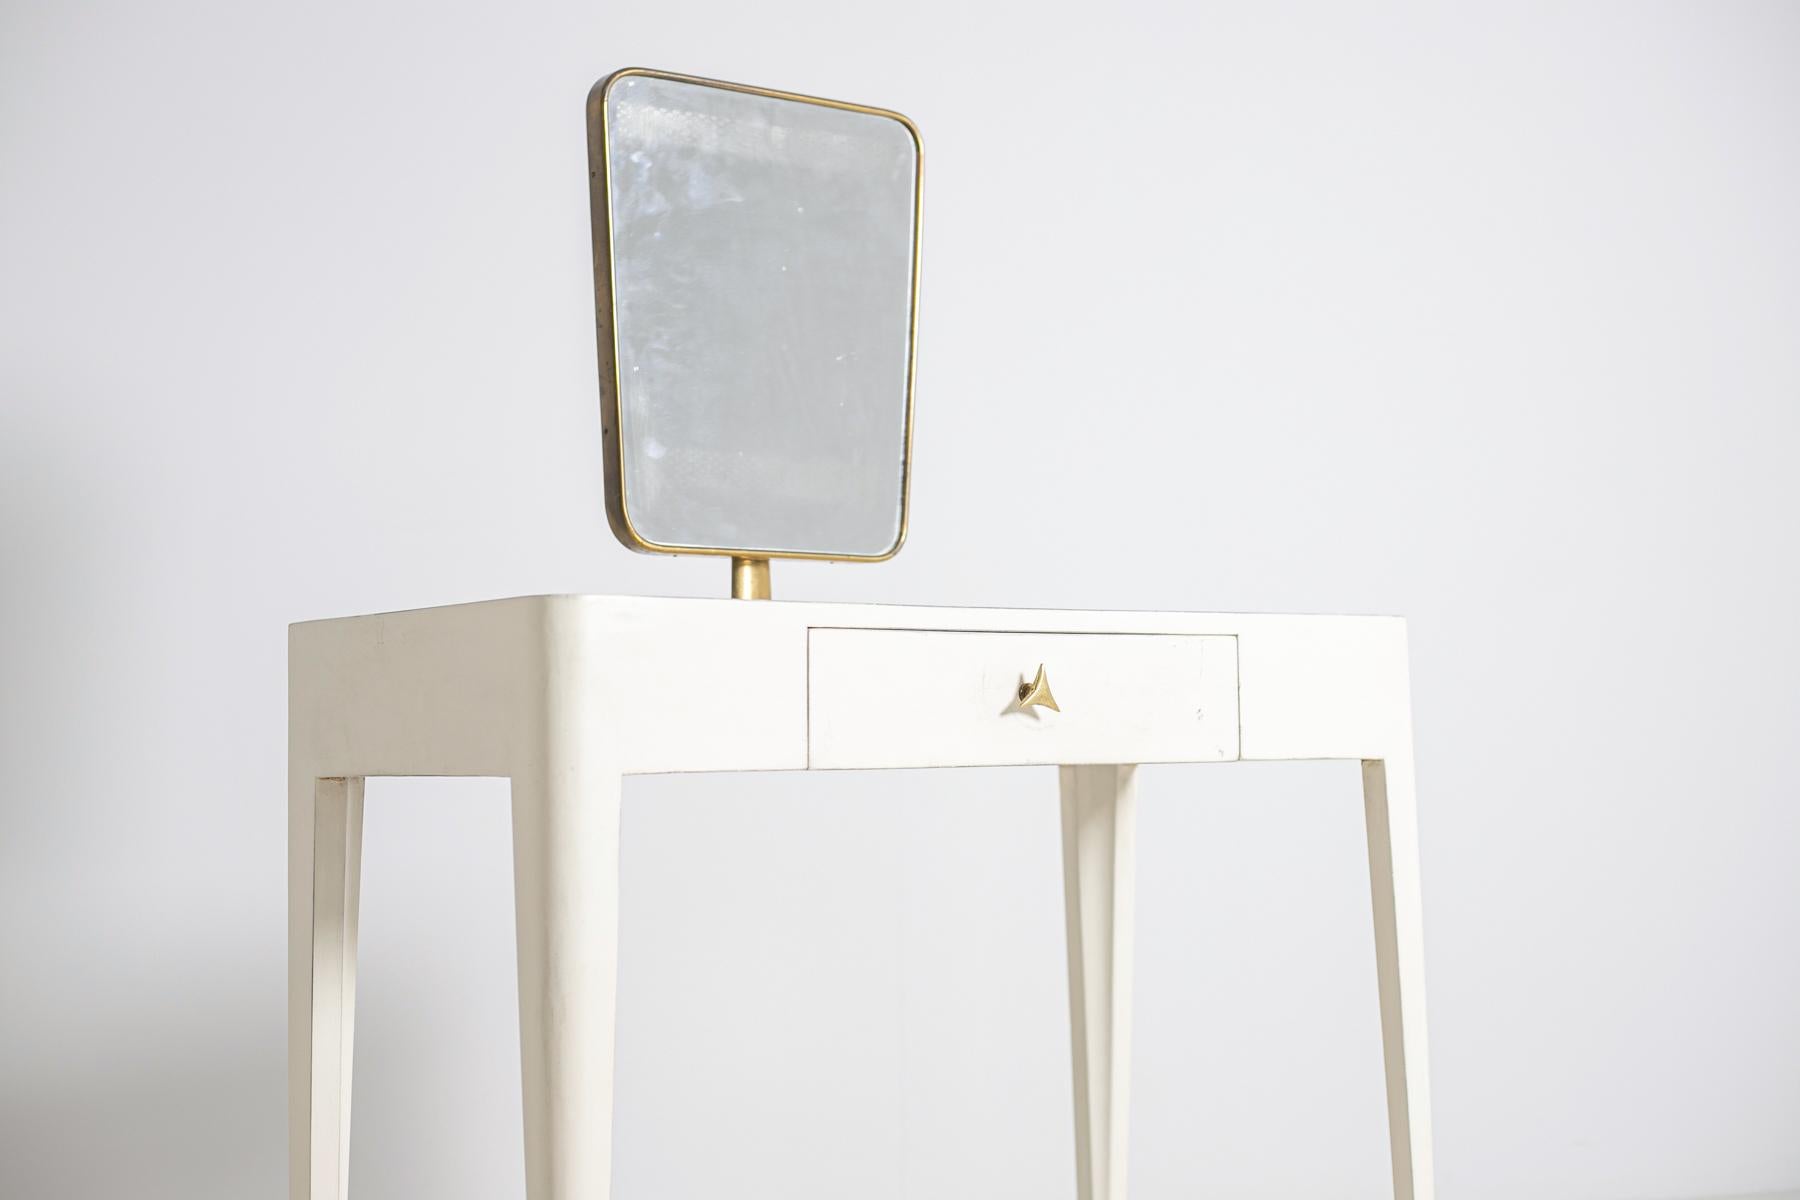 Wonderful little make-up desk from the 1950s. The desk is attributed to the famous Italian design Gio Ponti. The console is made of white painted wood. In the middle of the desk top we notice a small drawer that can be pulled out through a